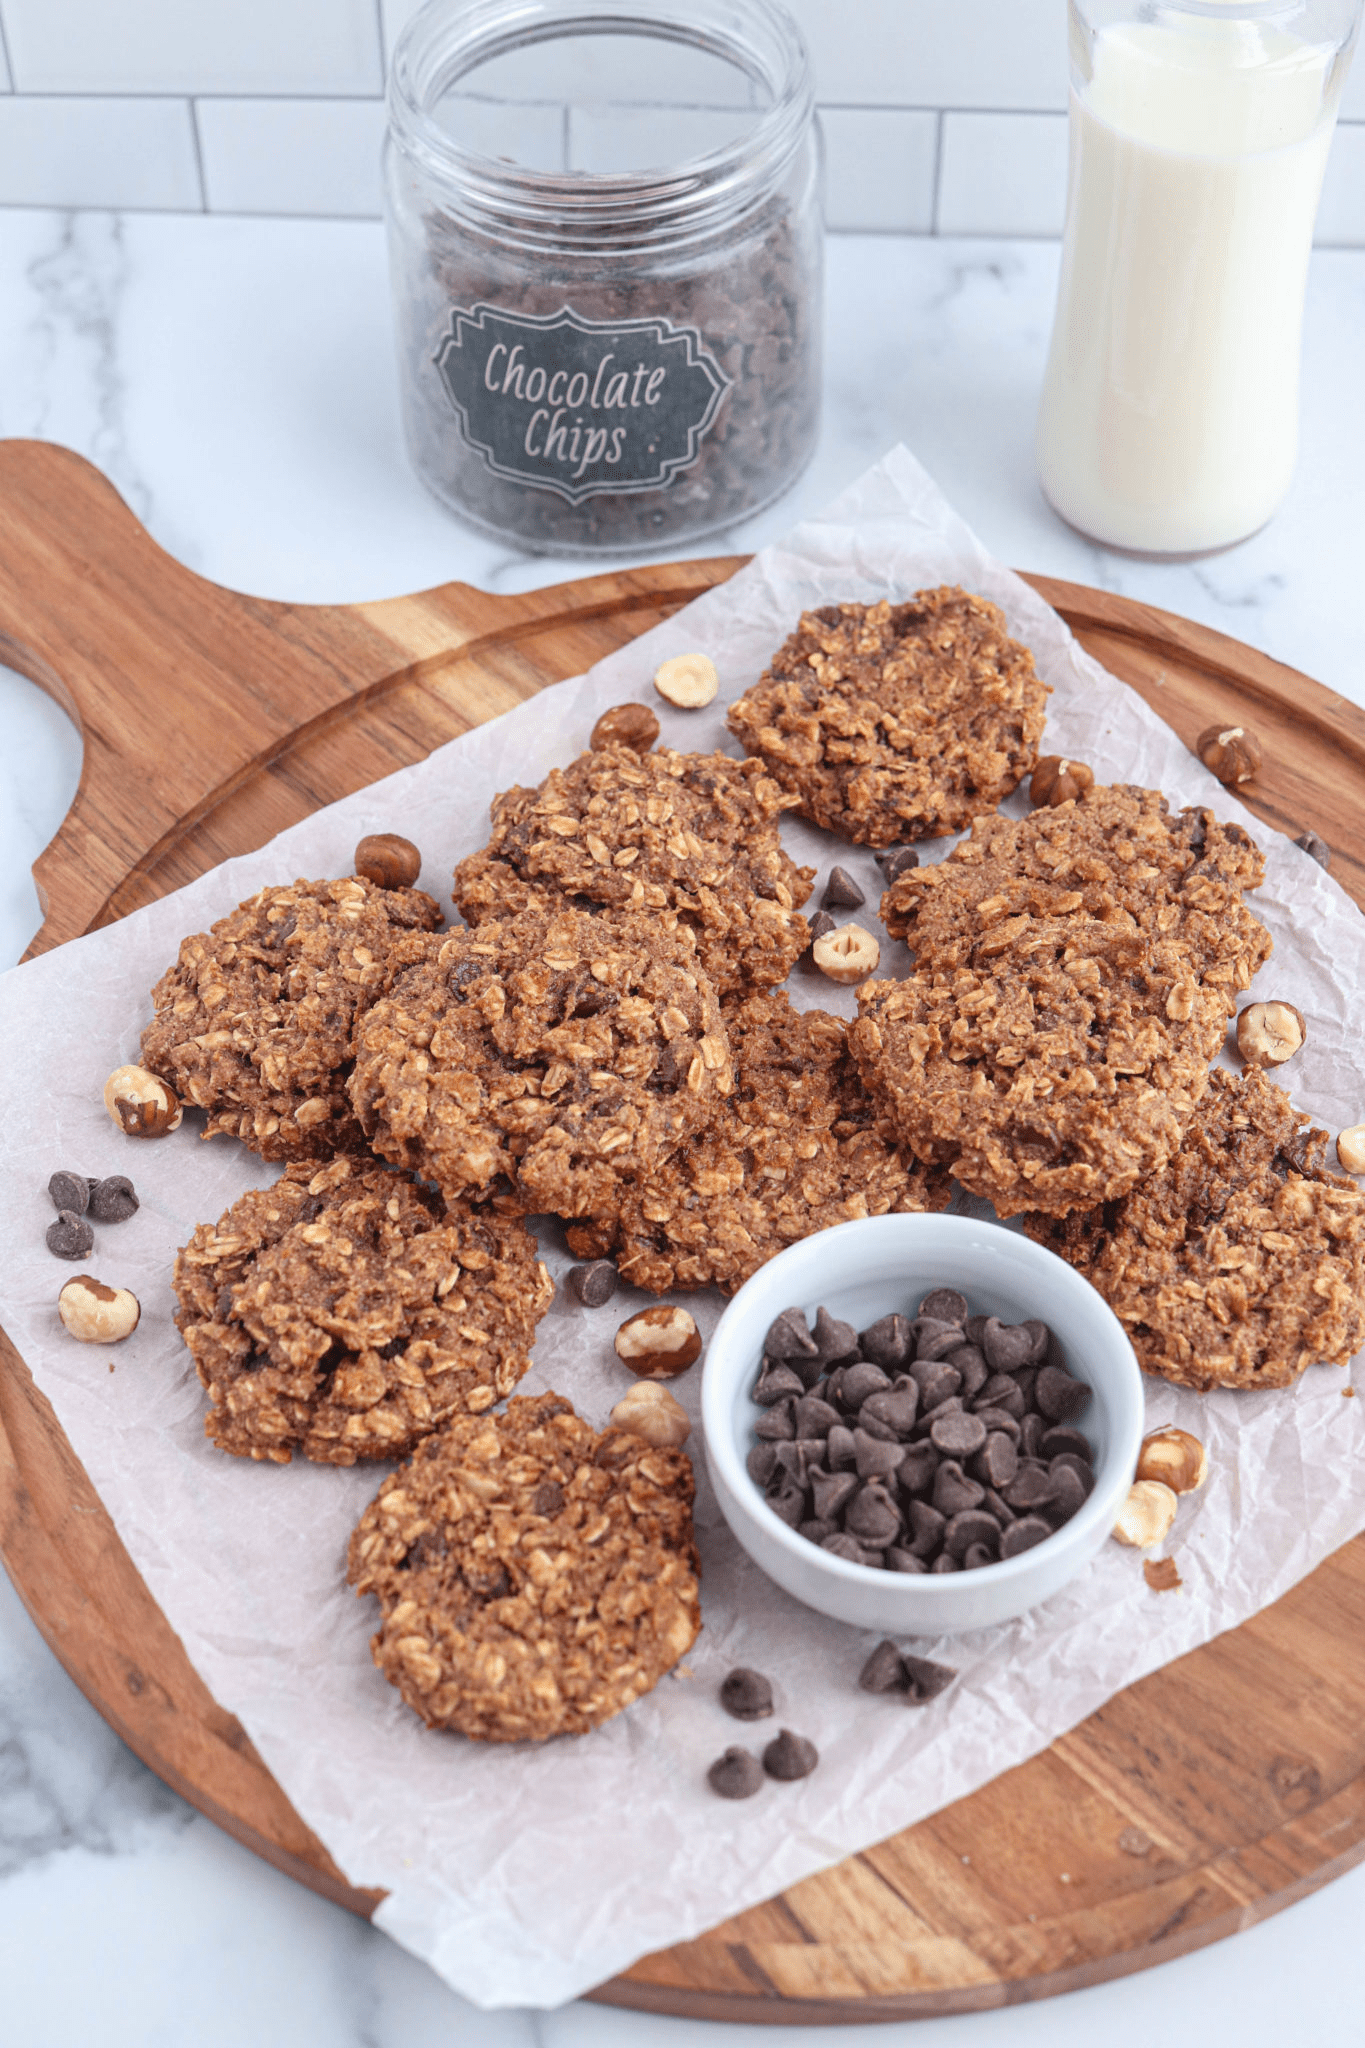 banana nutella oatmeal cookies on paper lined round wooden board with a small container of chocolate chips. 